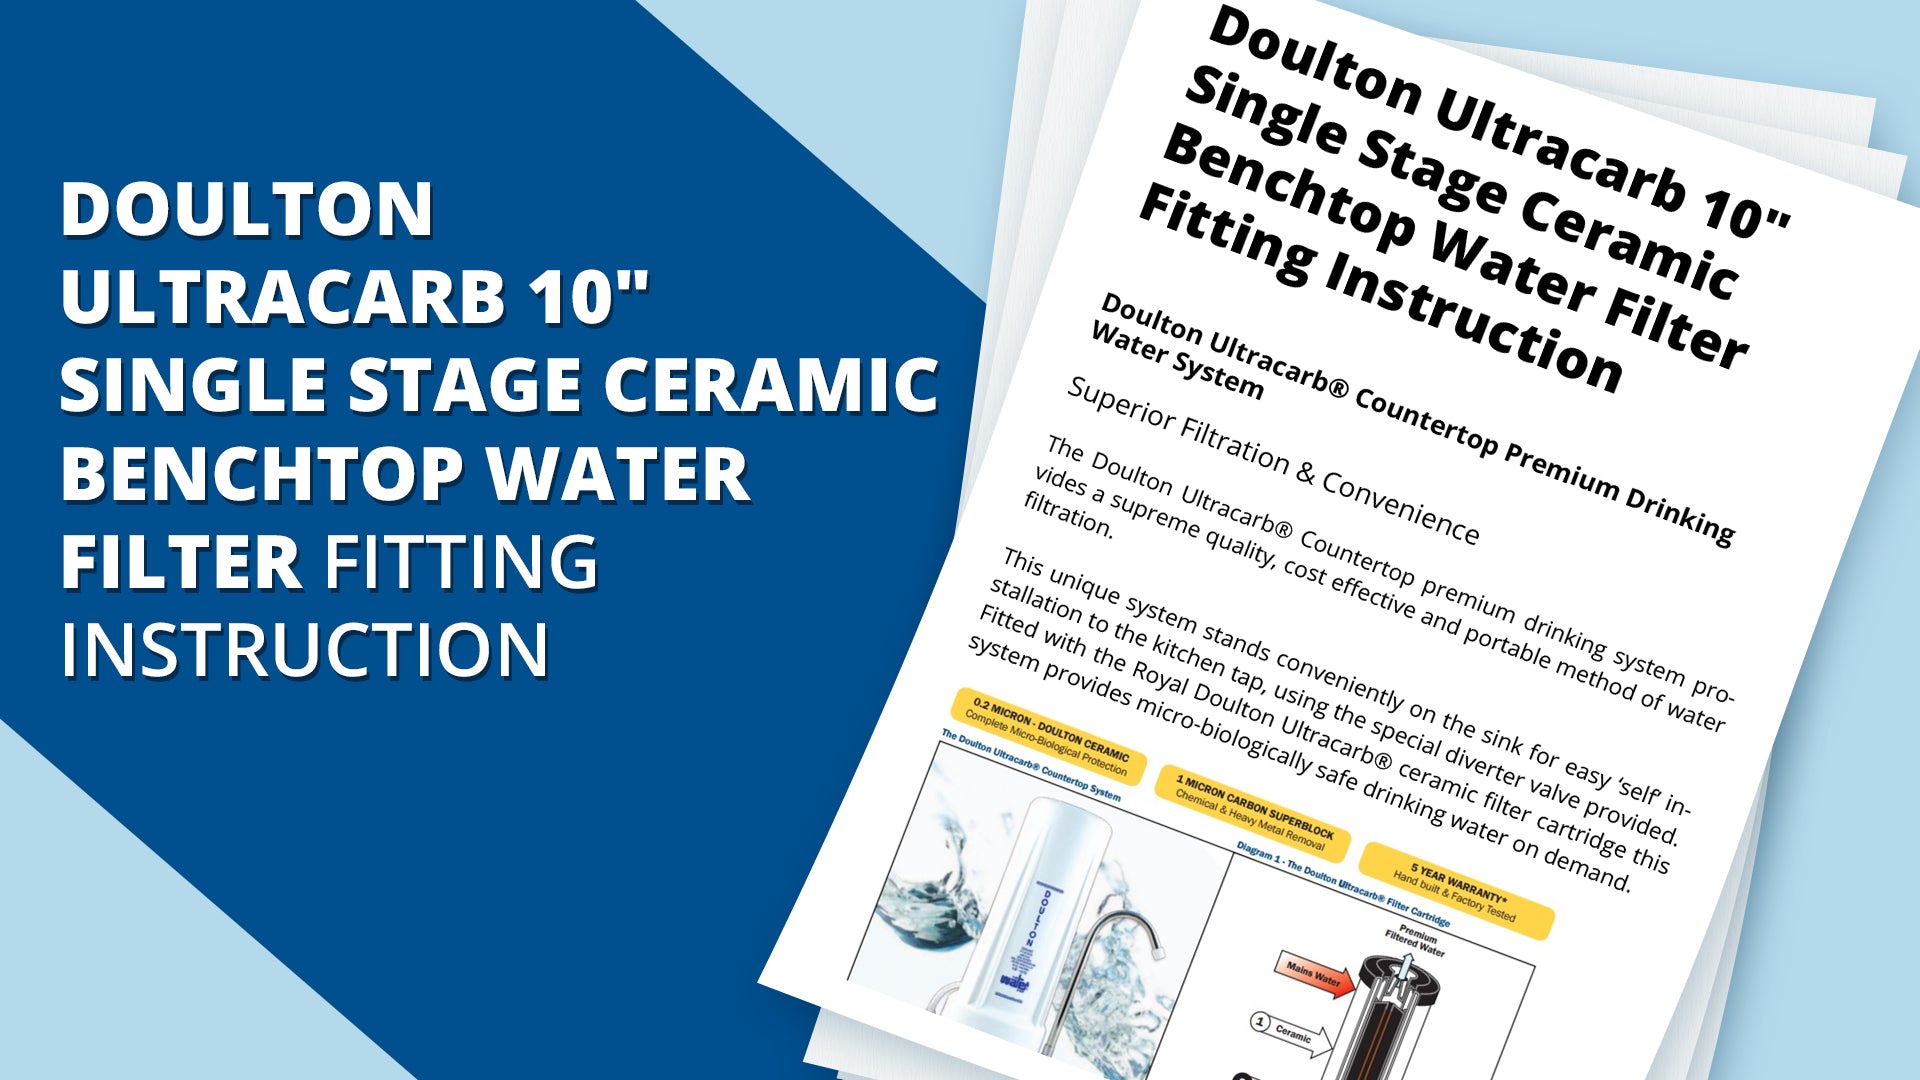 [VIDEO] Doulton Ultracarb 10" Single Stage Ceramic Benchtop Water Filter Fitting Instruction